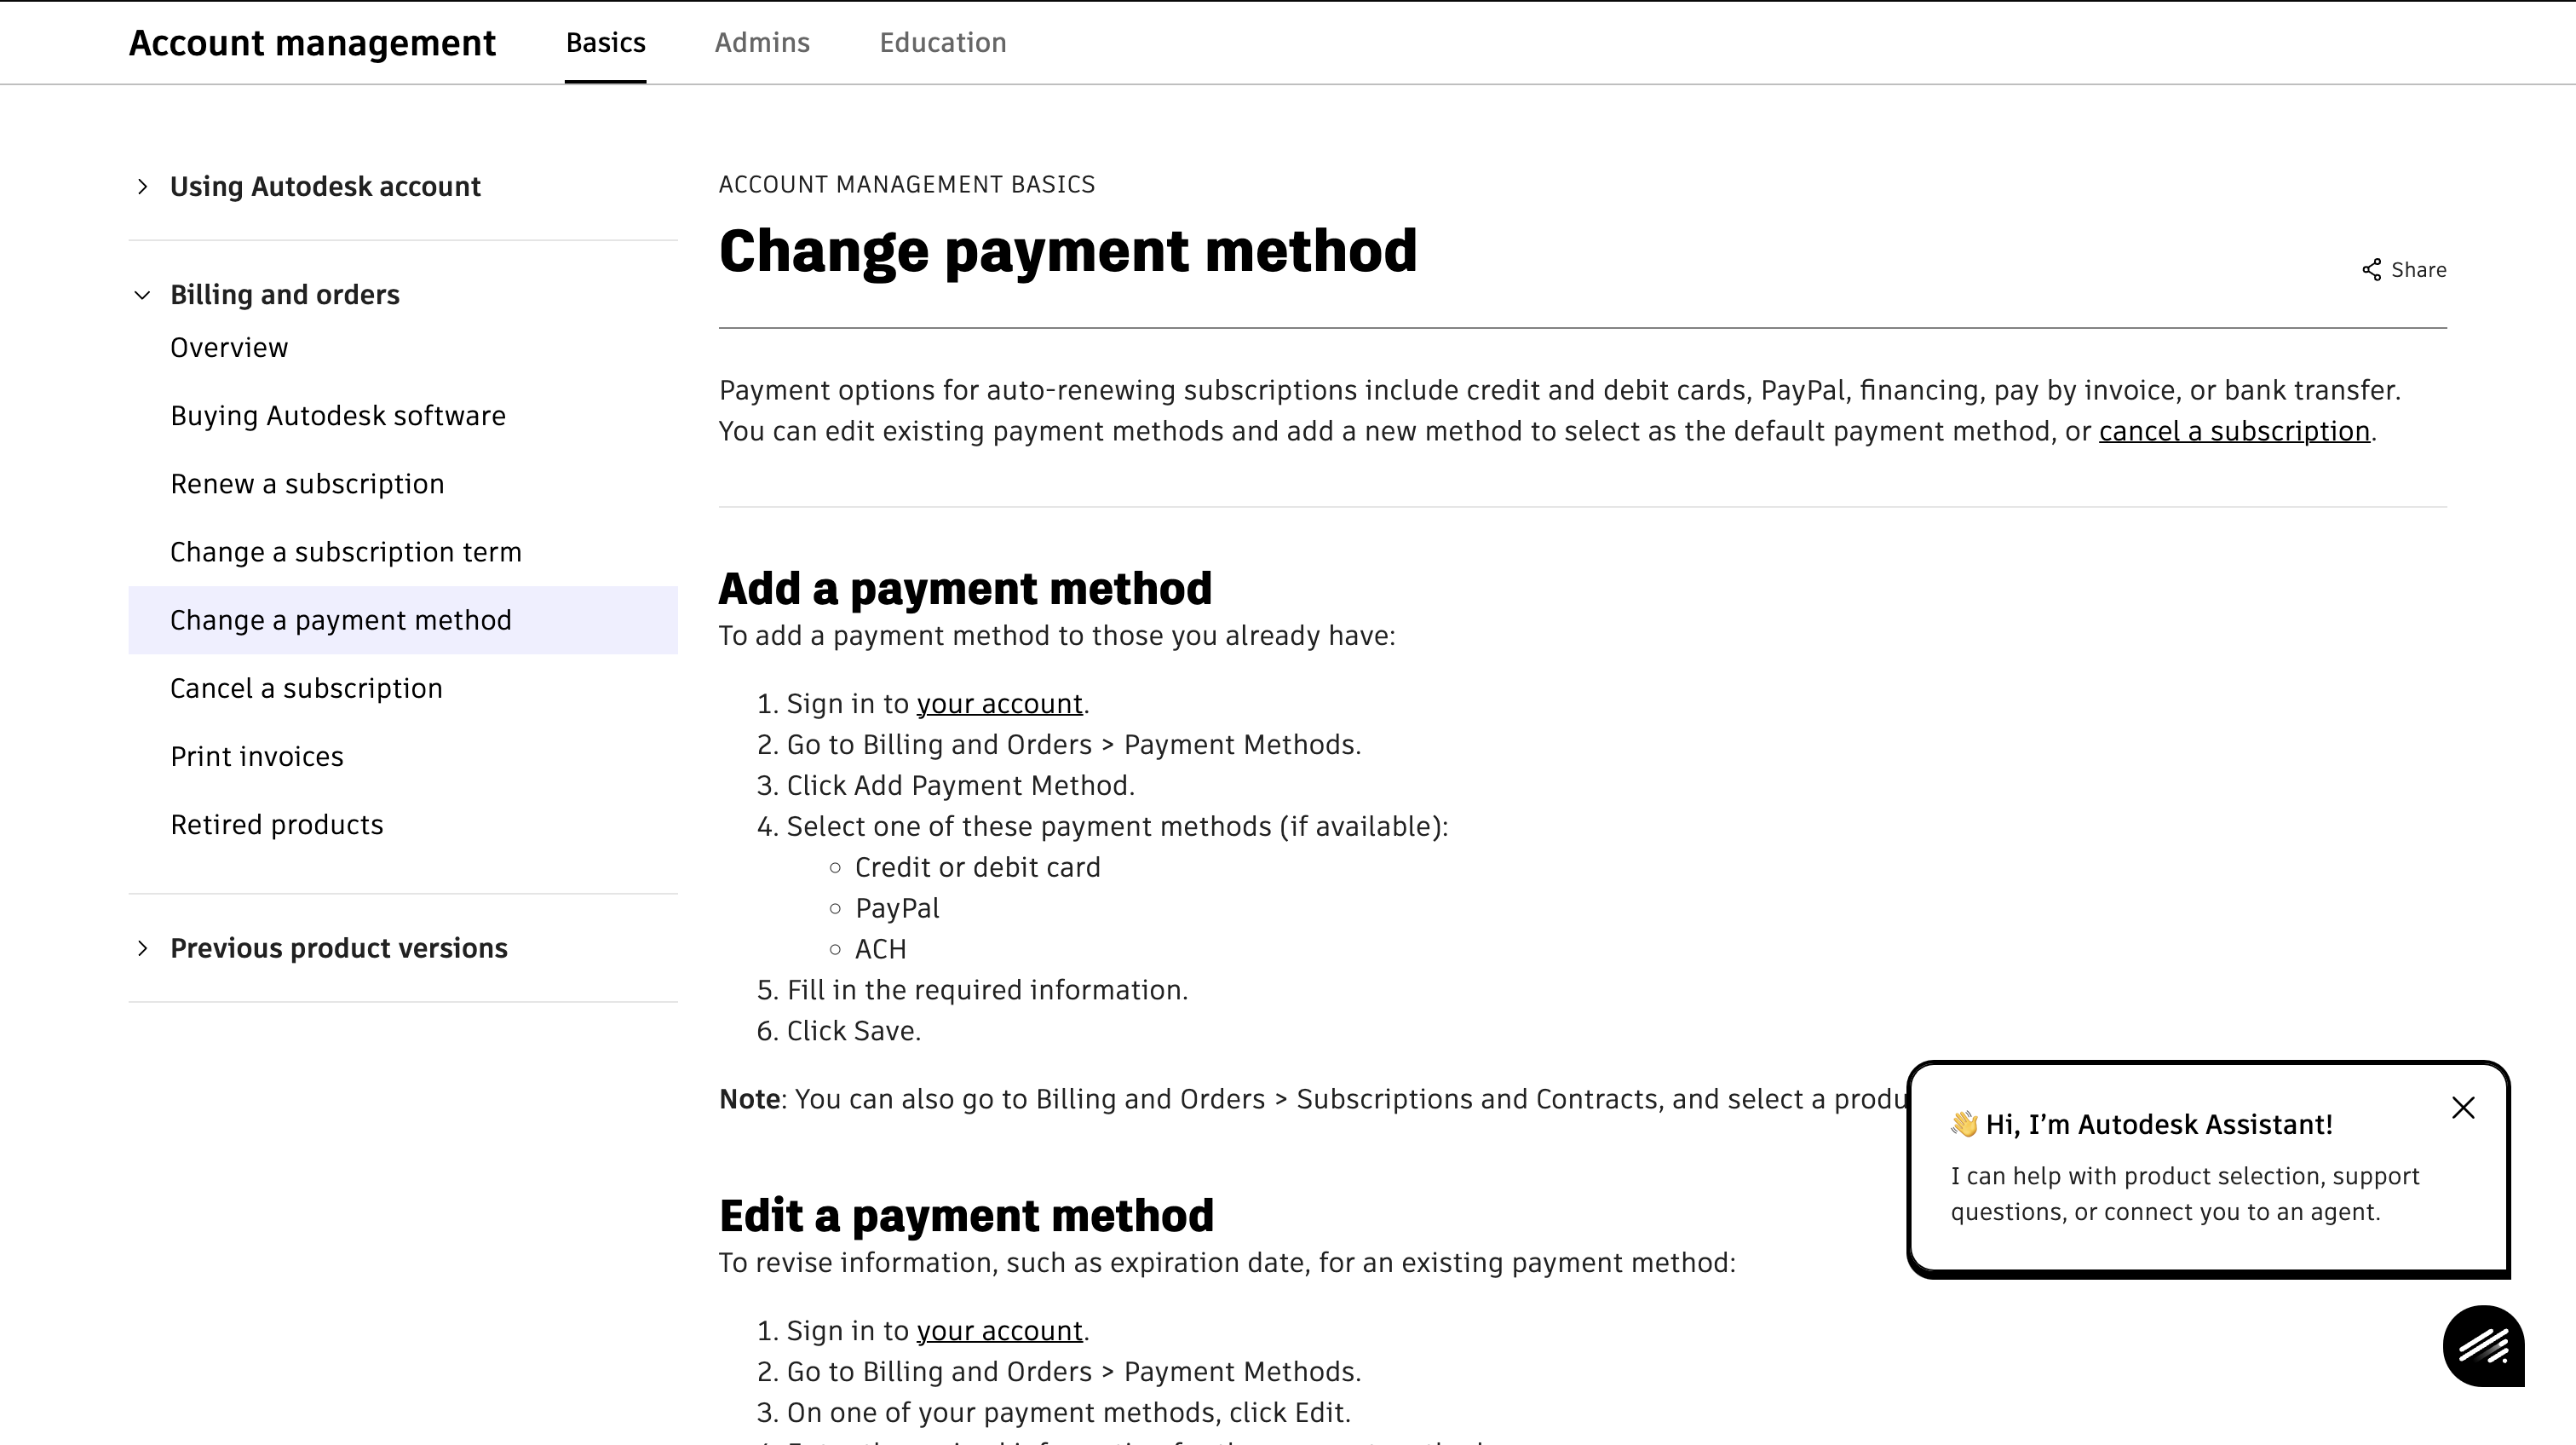 Account management support page with instructions for changing, adding, and editing payment methods.